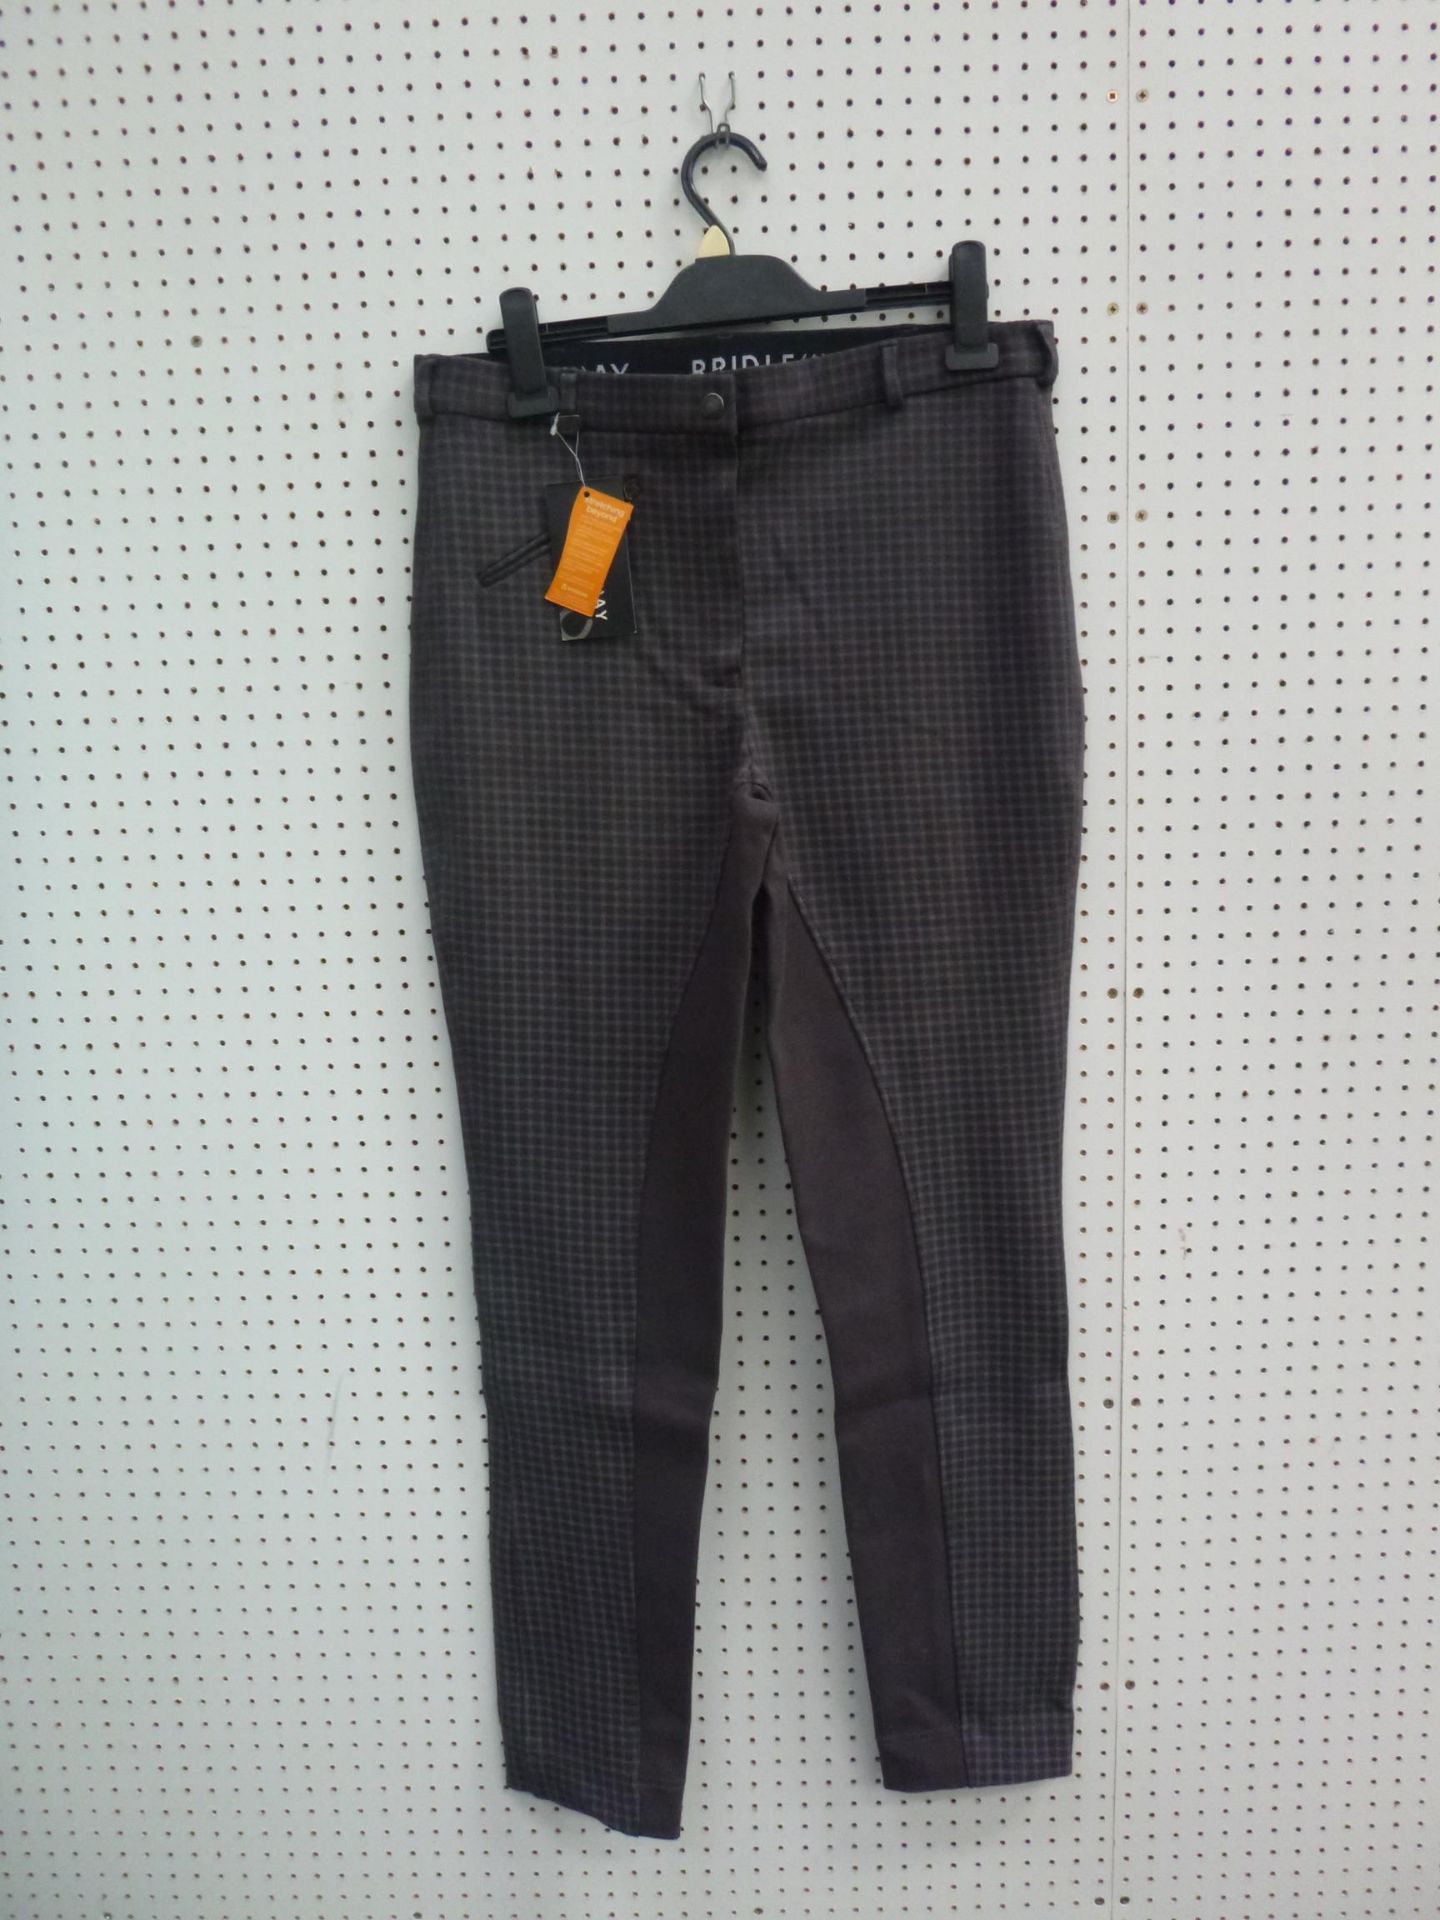 * Two pairs of New Bridleway Ladies Jodhpurs. A ladies Cotton Knitted Checks size 36 in Brown/